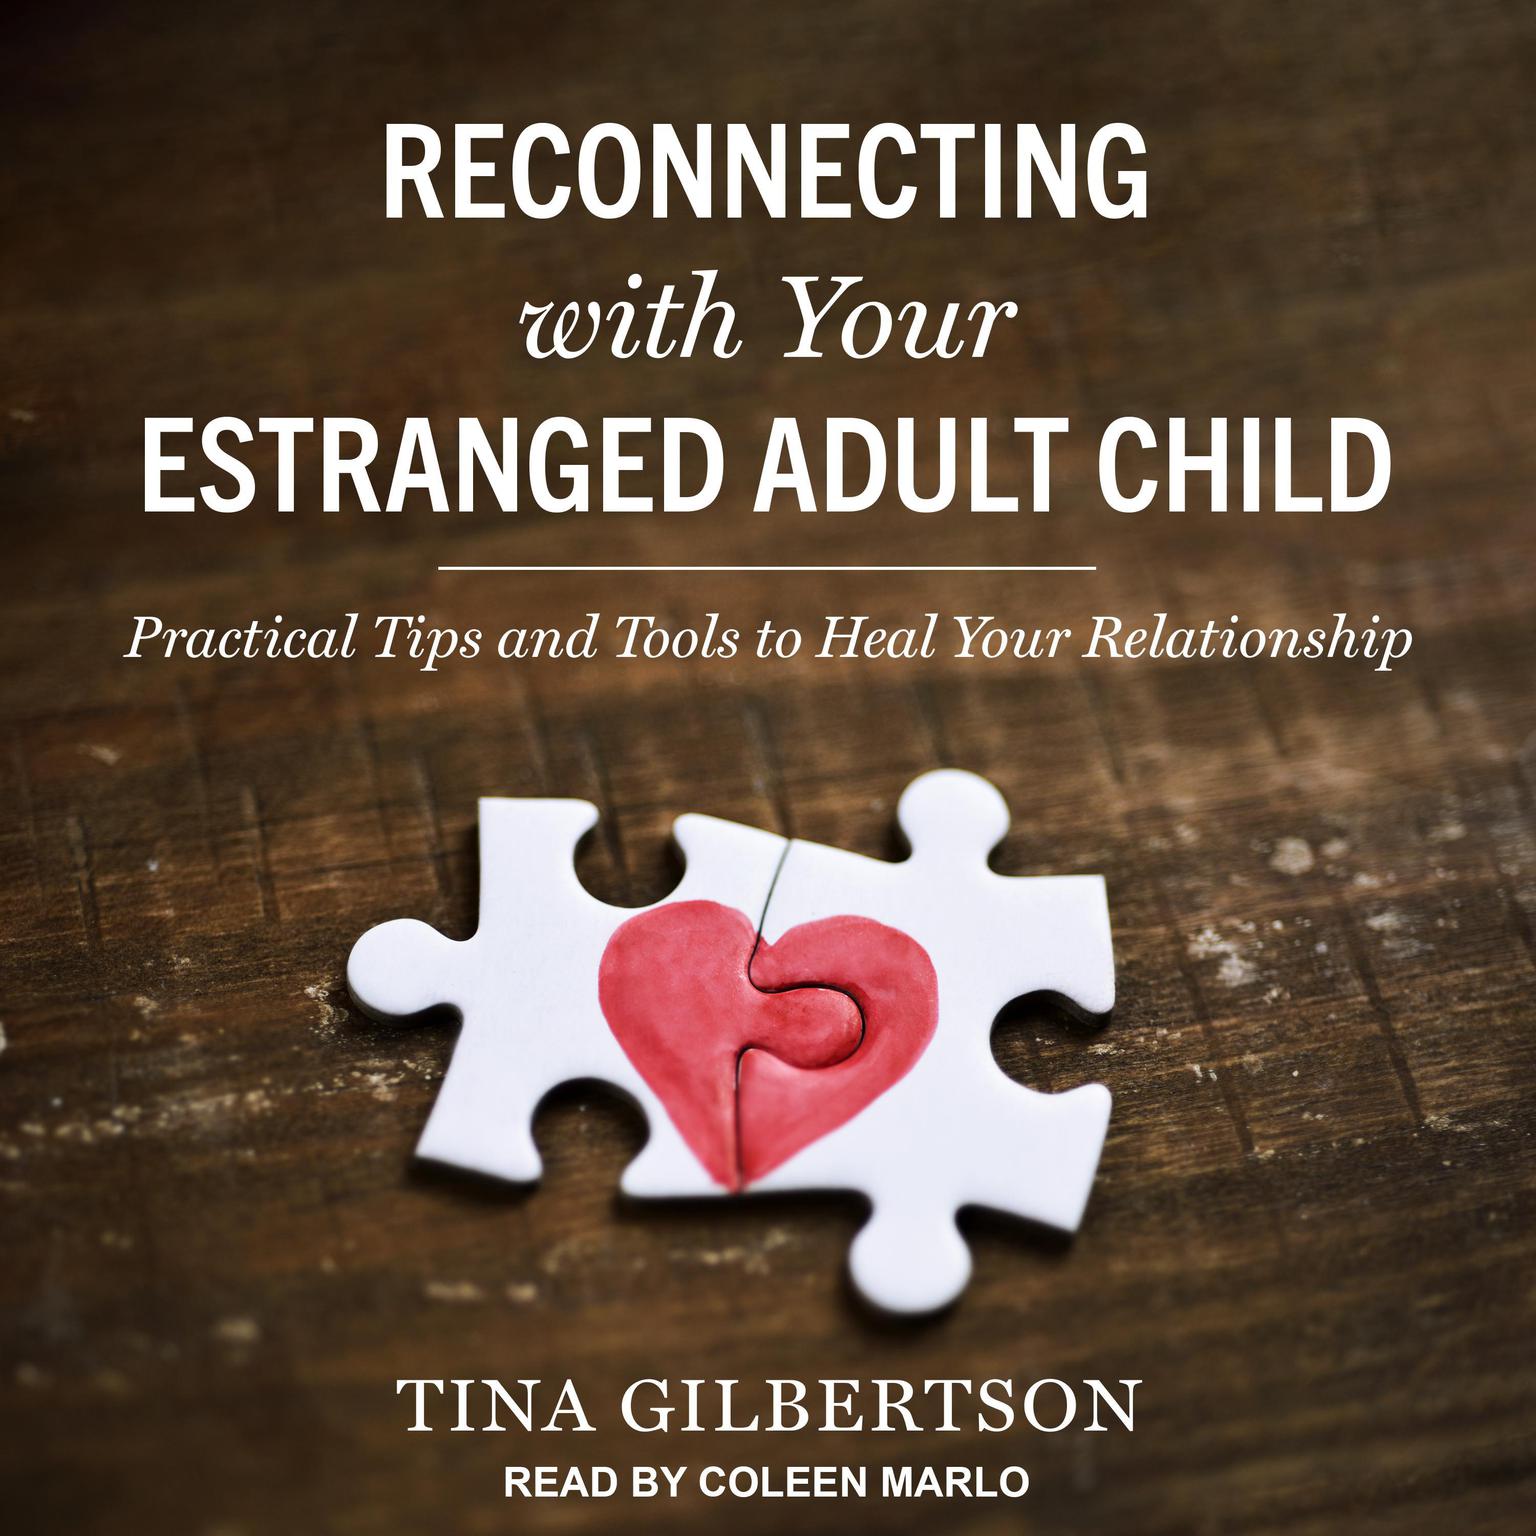 Reconnecting with Your Estranged Adult Child: Practical Tips and Tools to Heal Your Relationship Audiobook, by Tina Gilbertson